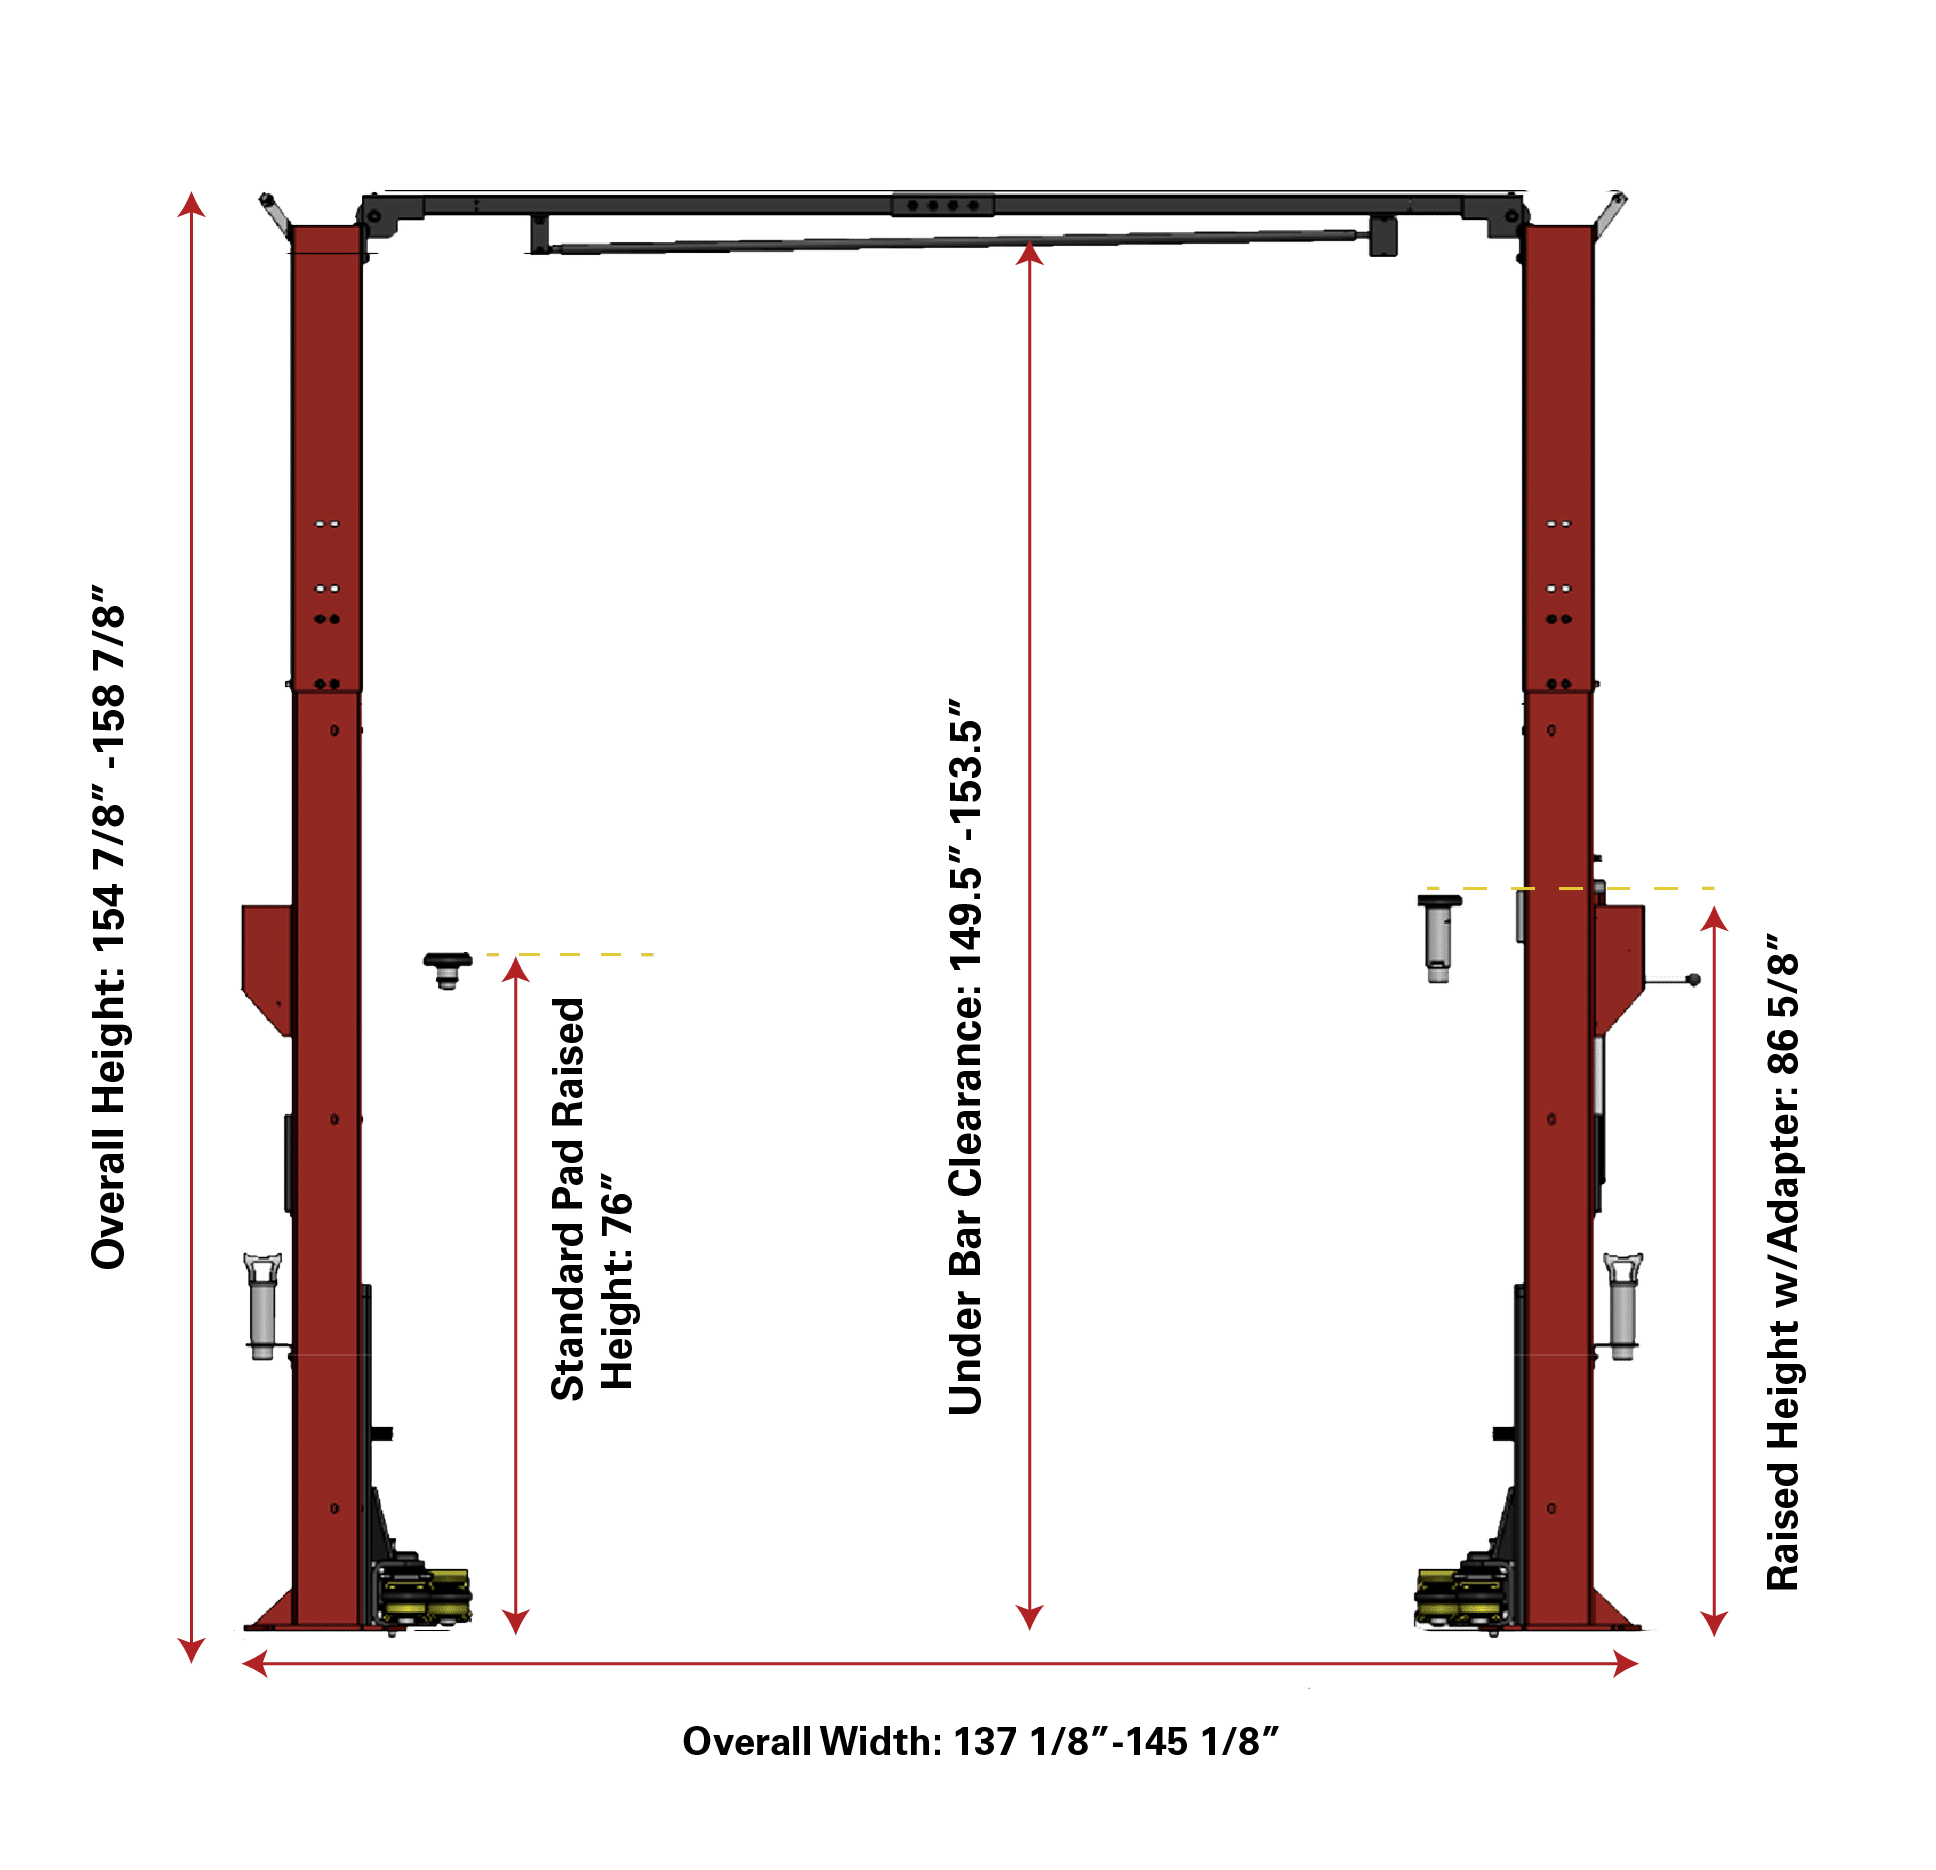 A color CAD drawing showing the width, depth, and height dimensions of a standard Coats 12K two post lift